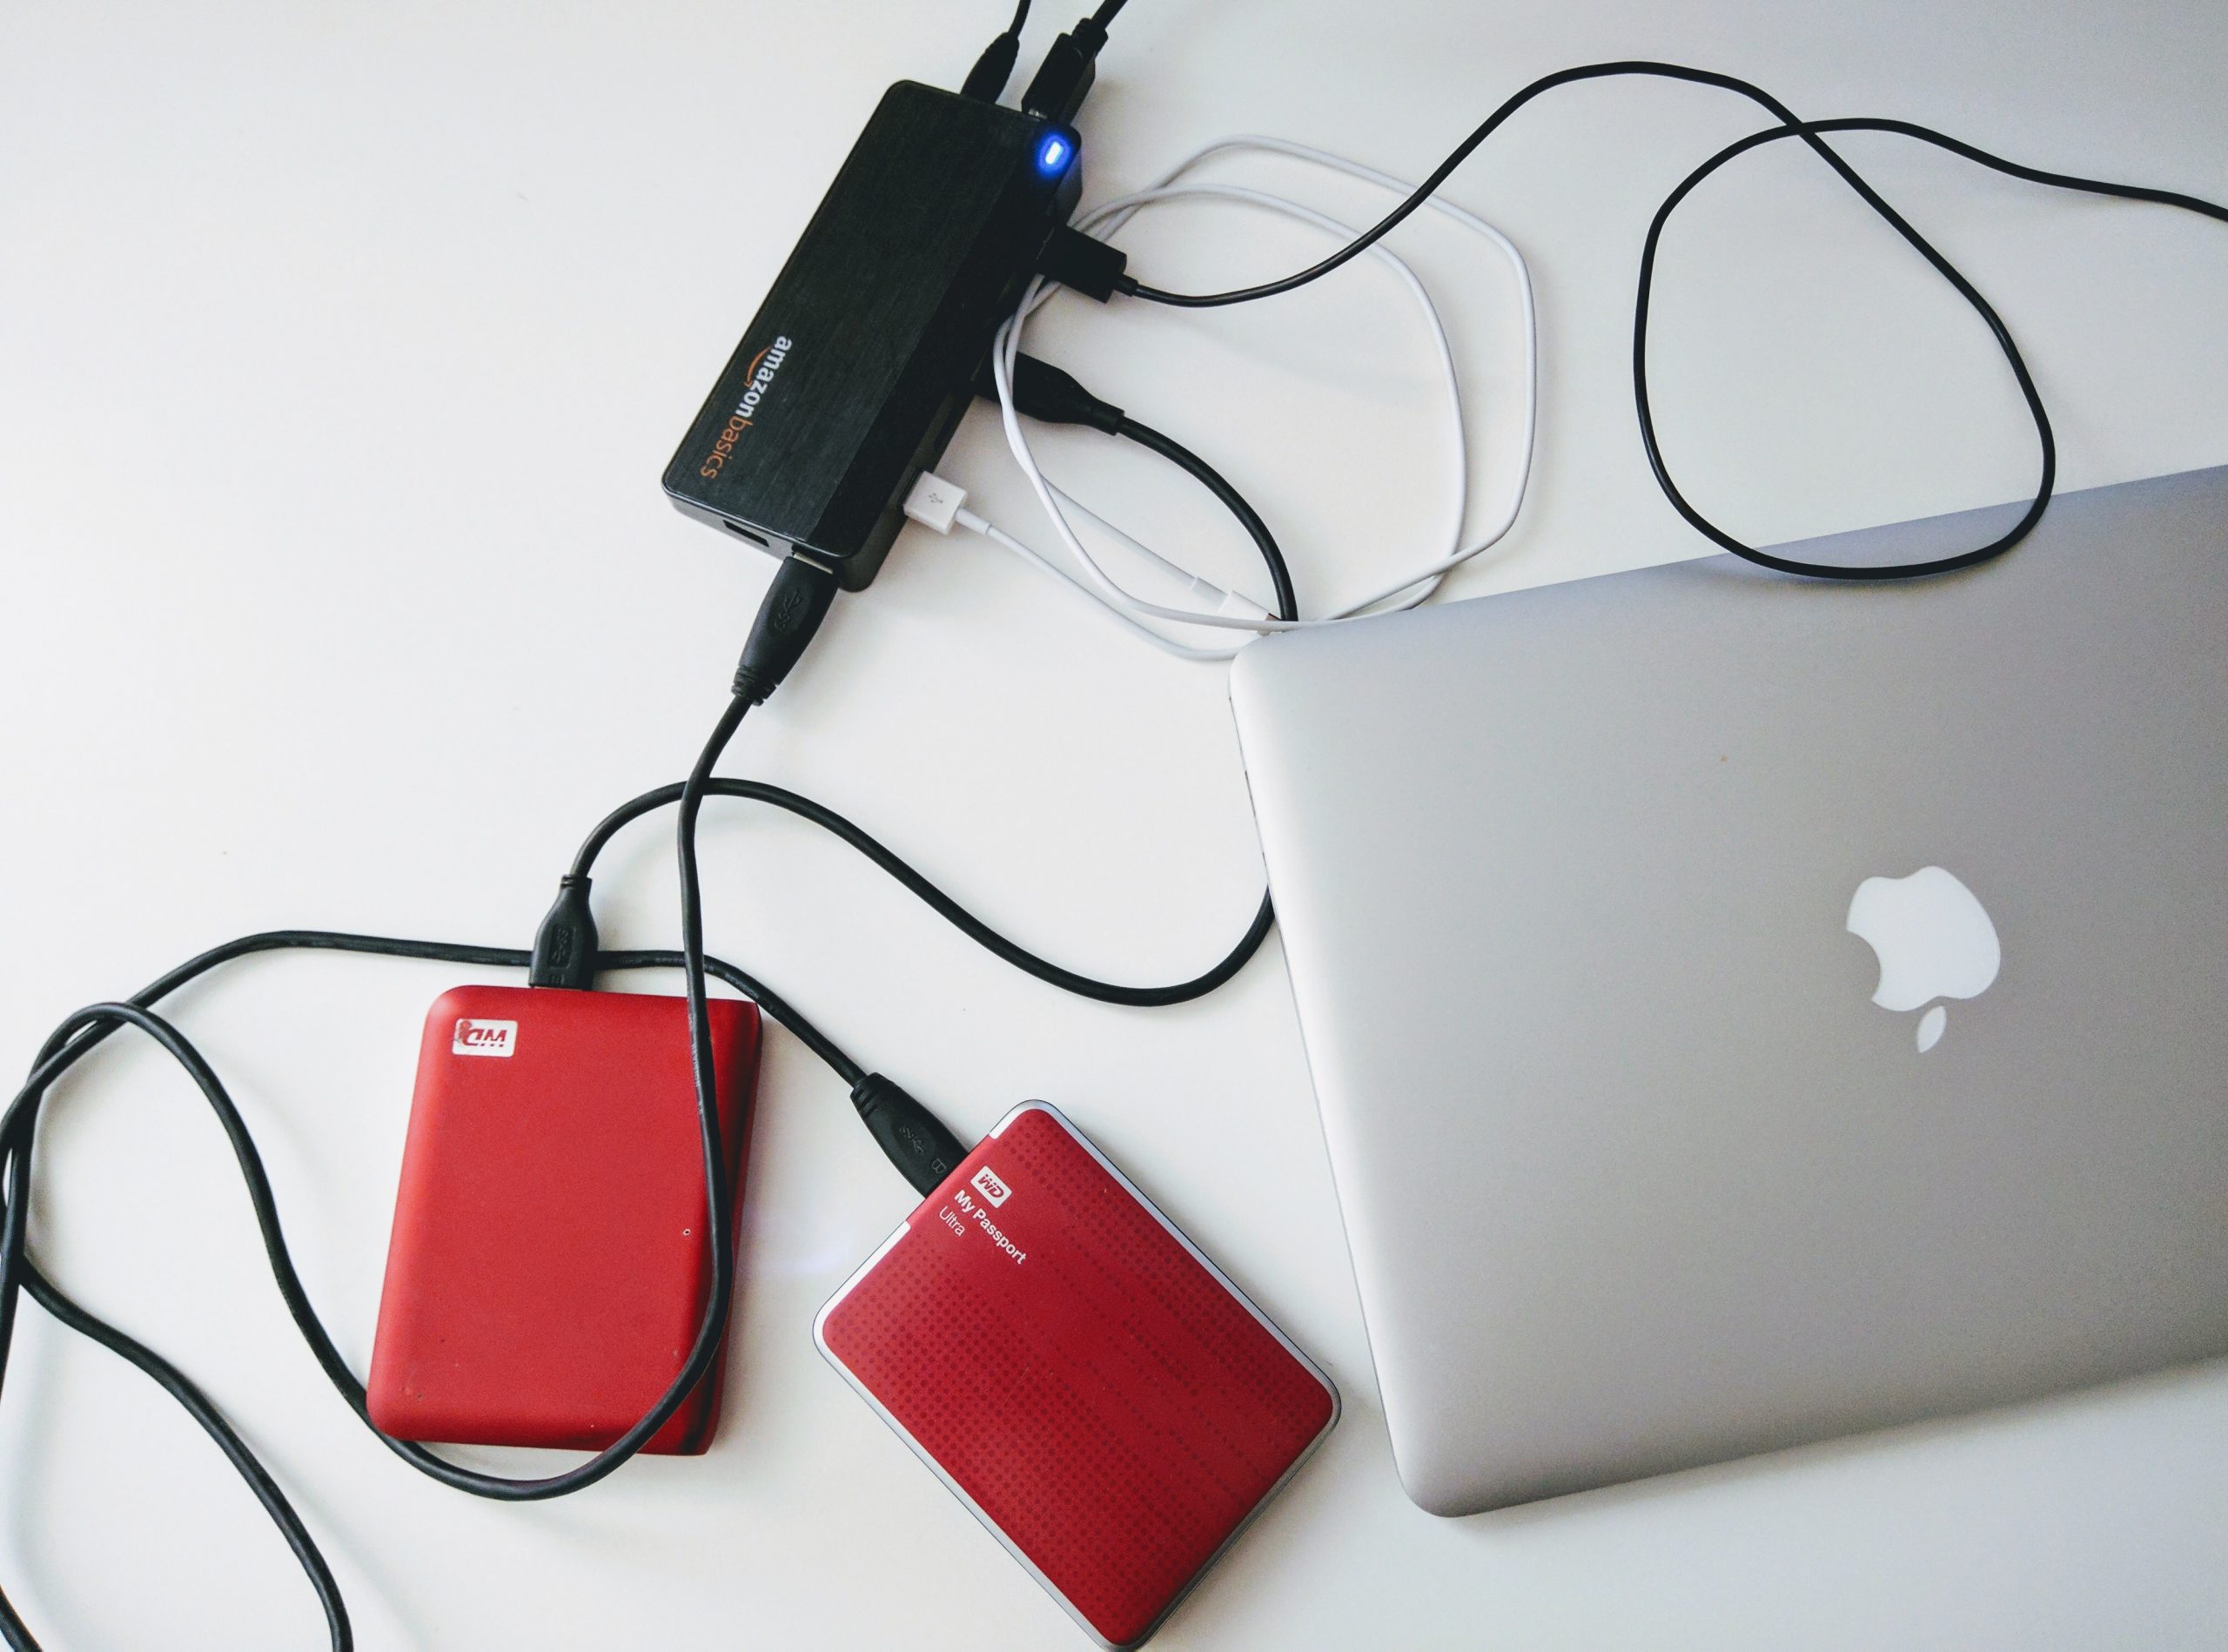 external hard drives with wifi/Bluetooth are still rare/clunky/expensive